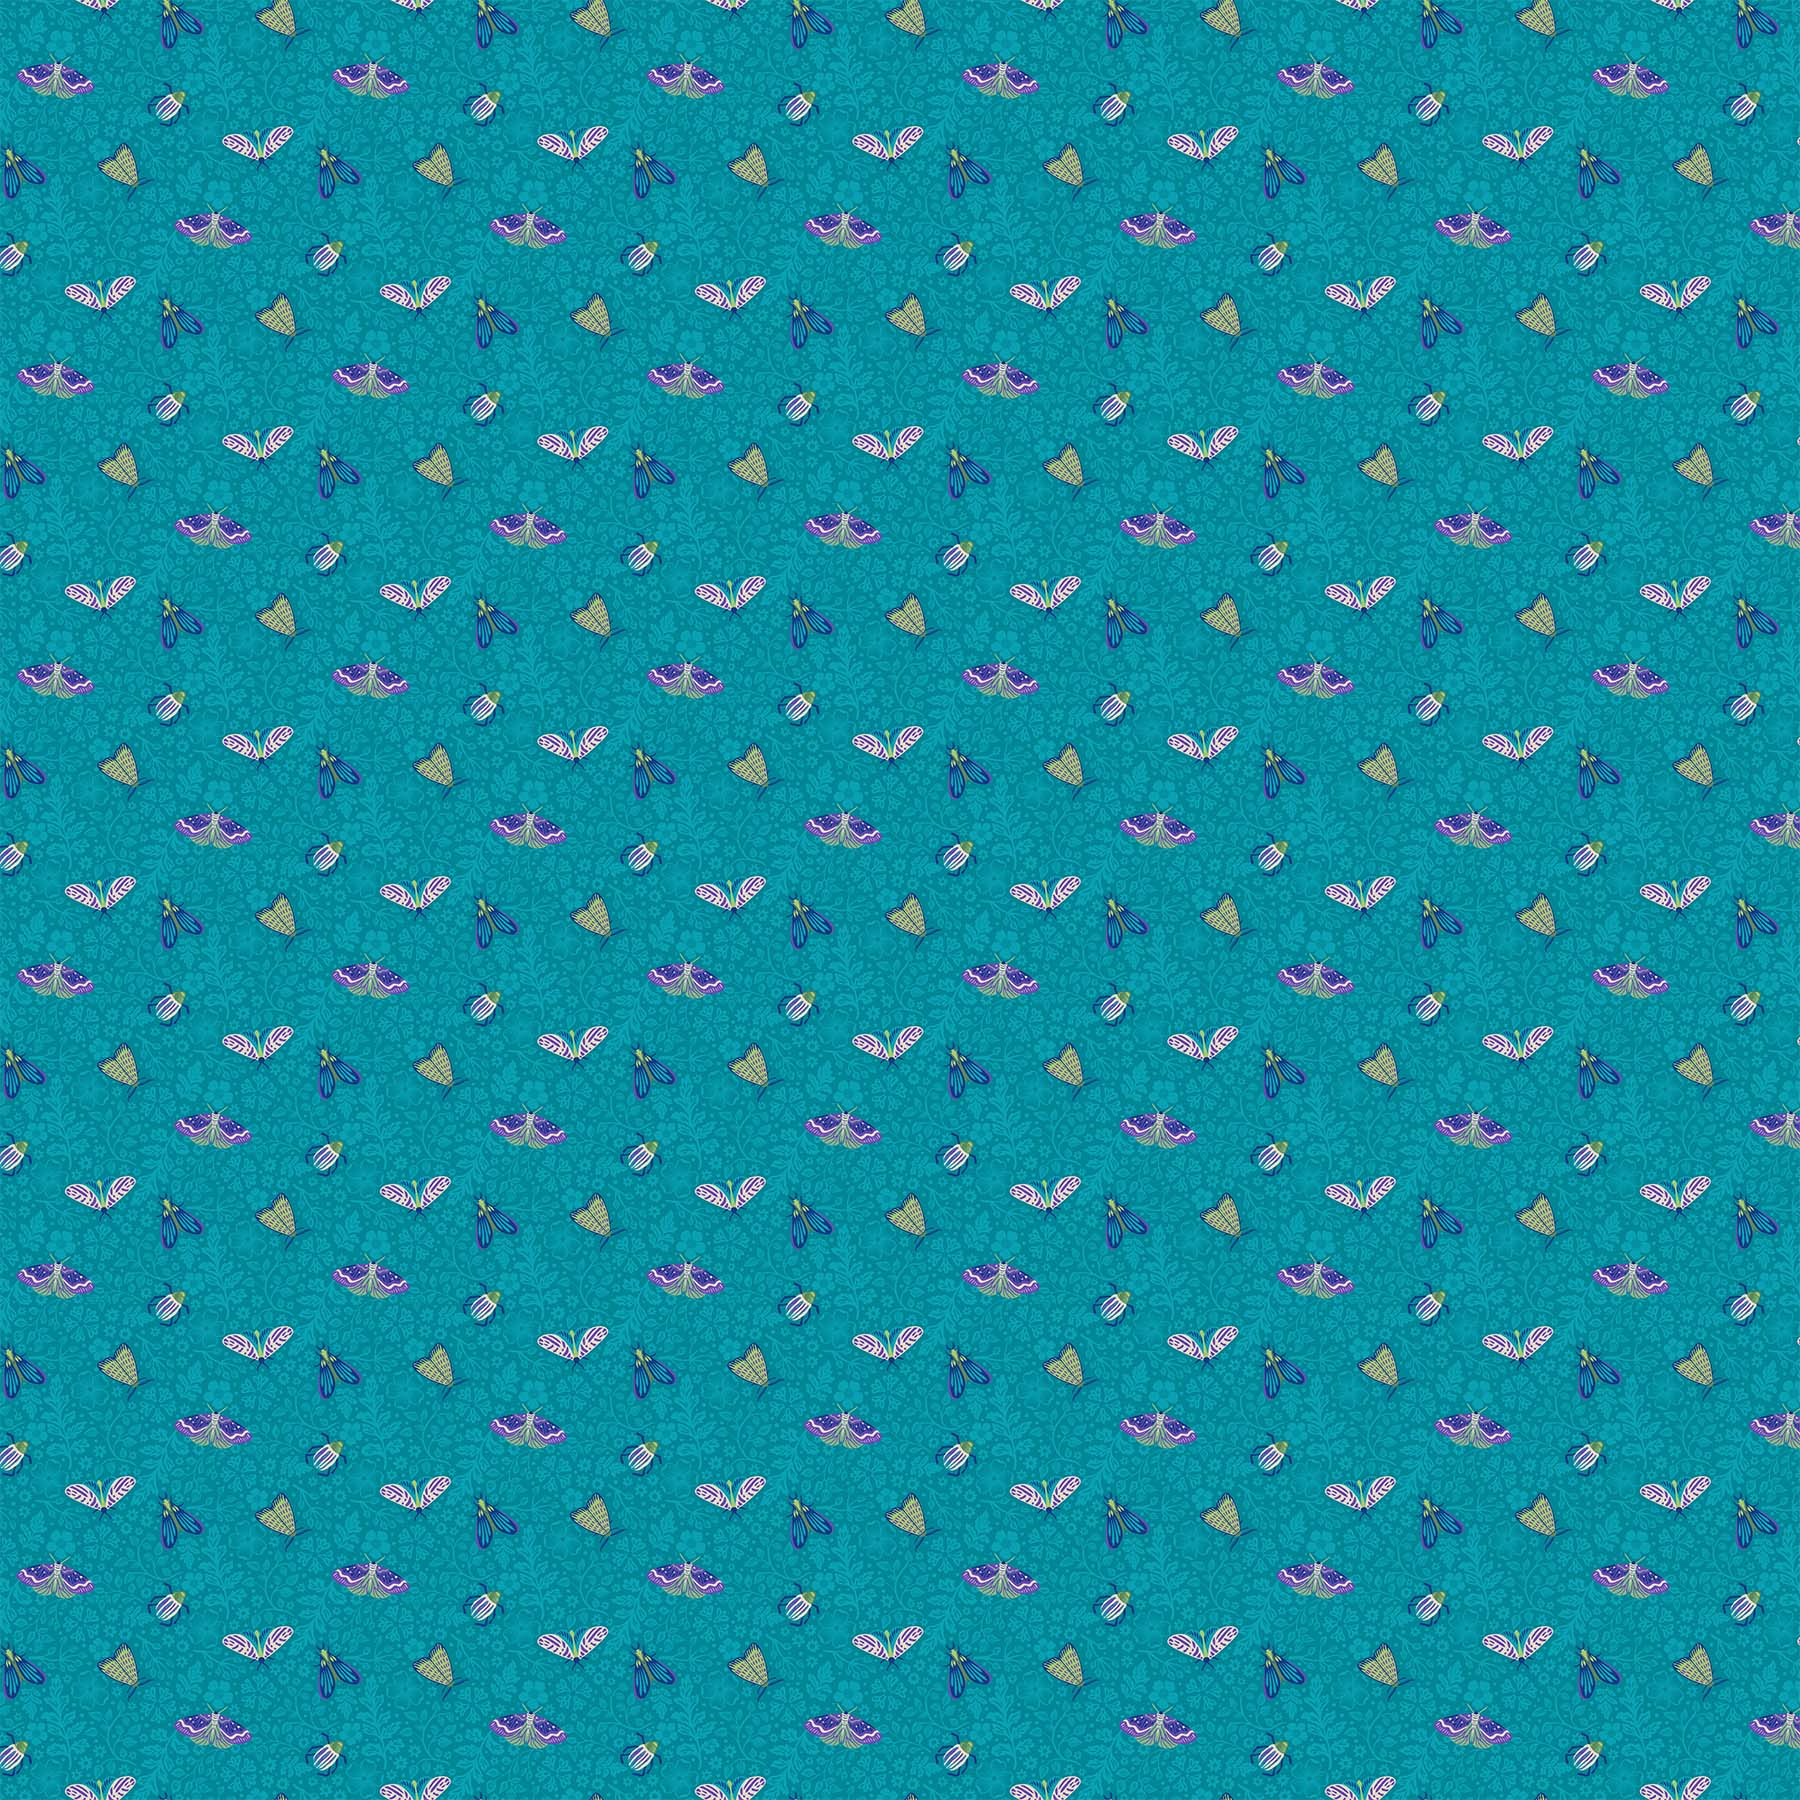 Waters Edge - 26715-66 - Cotton Fabric